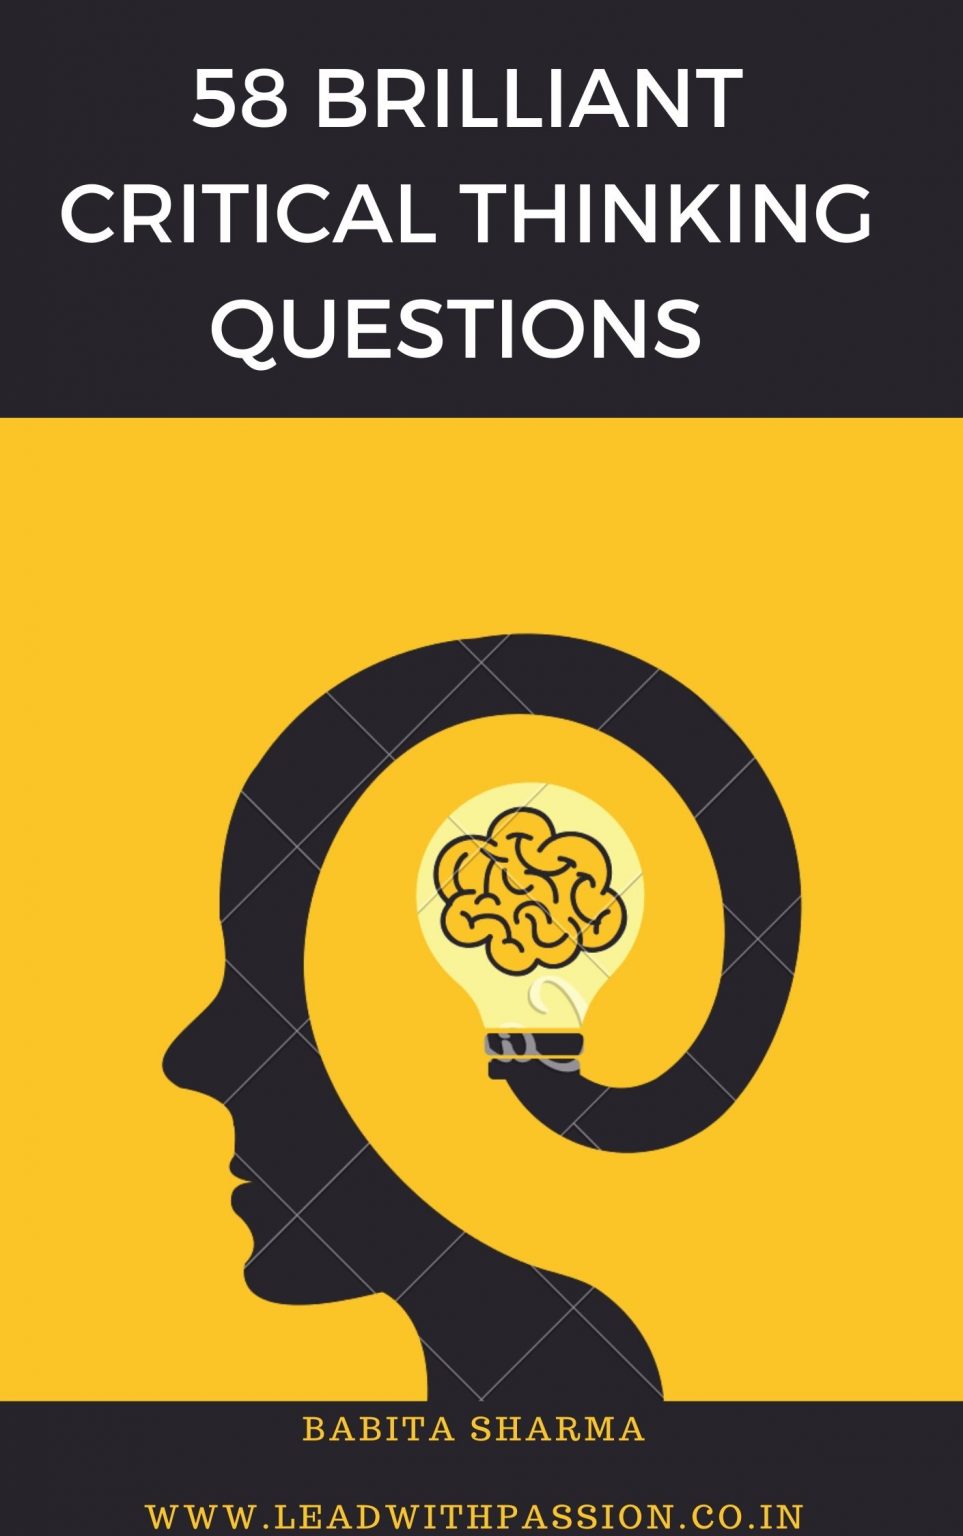 asking questions critical thinking